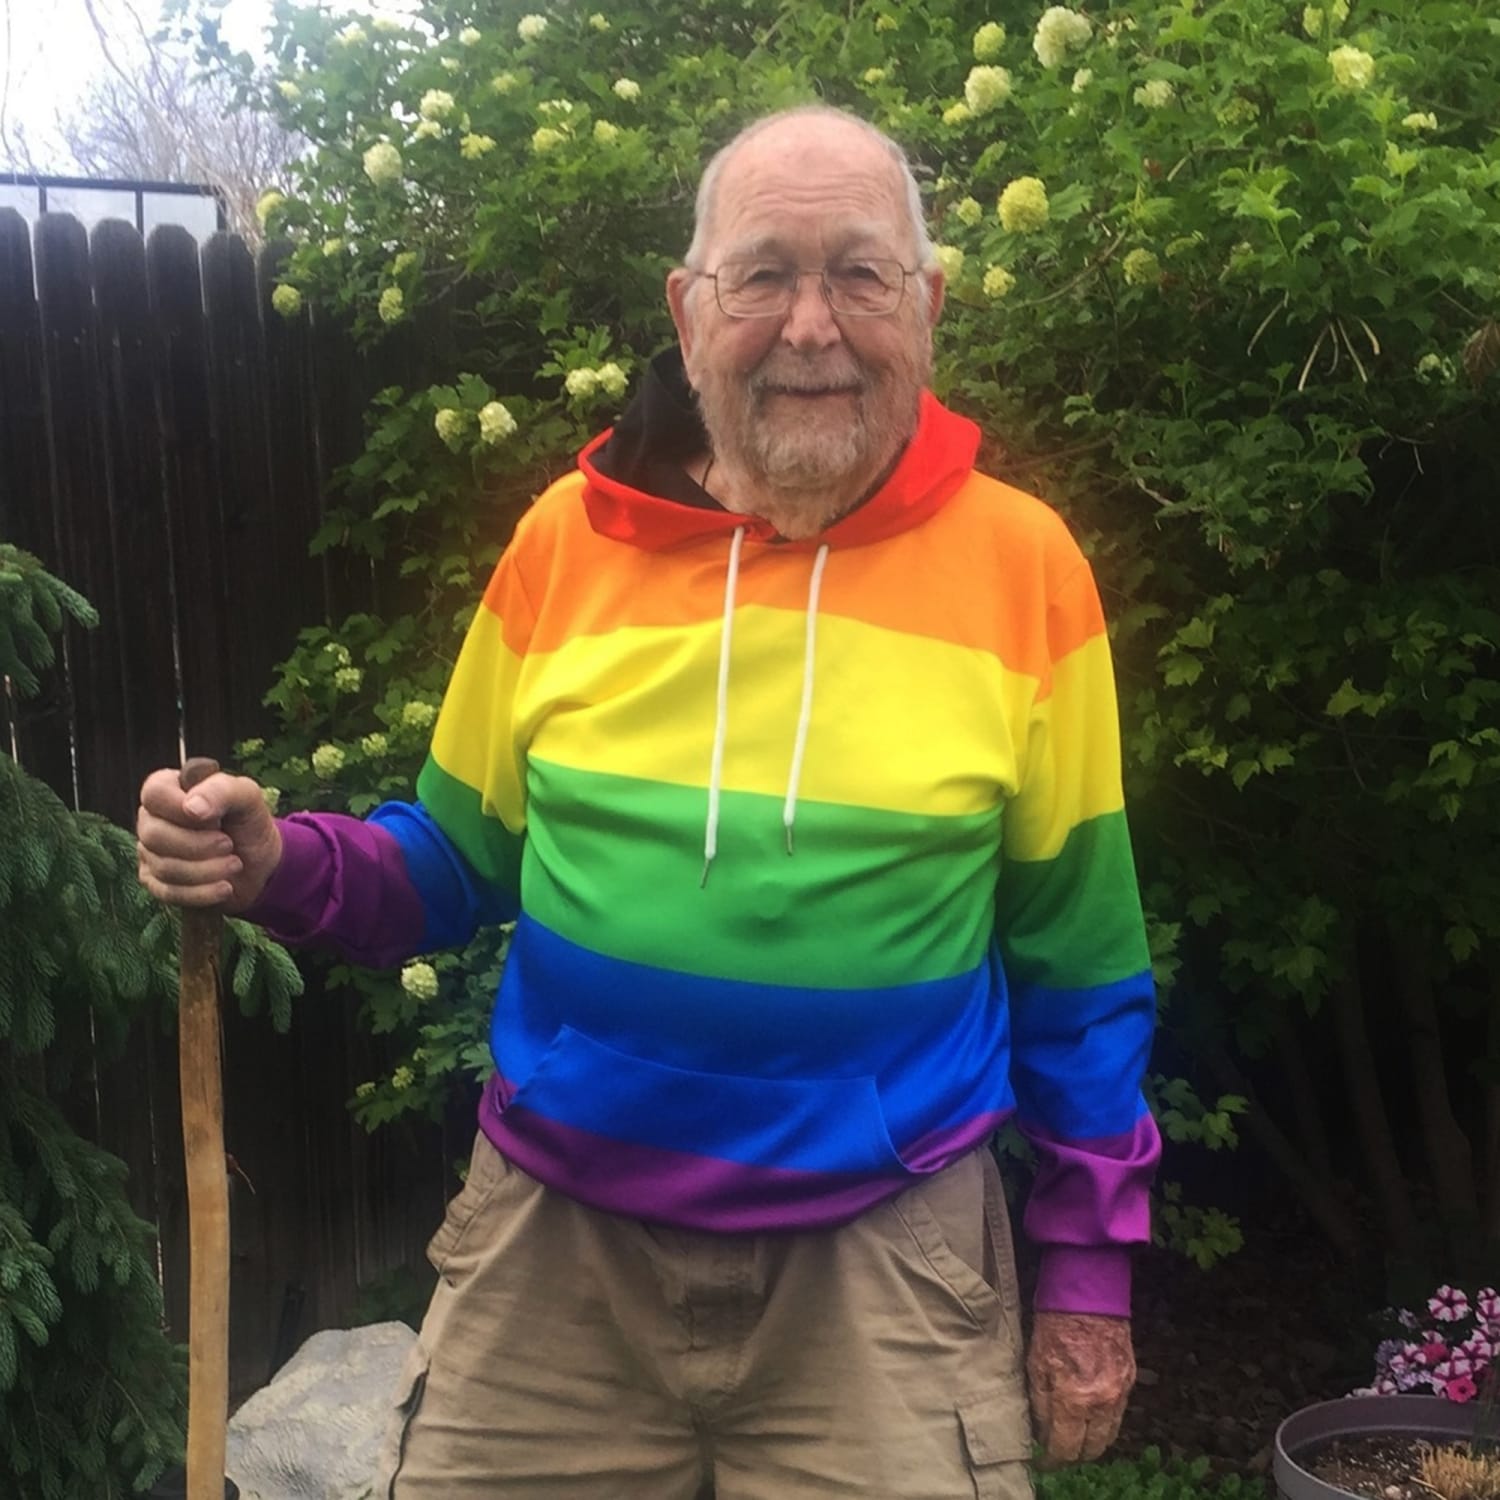 90-year-old grandfather Kenneth Felts comes out as